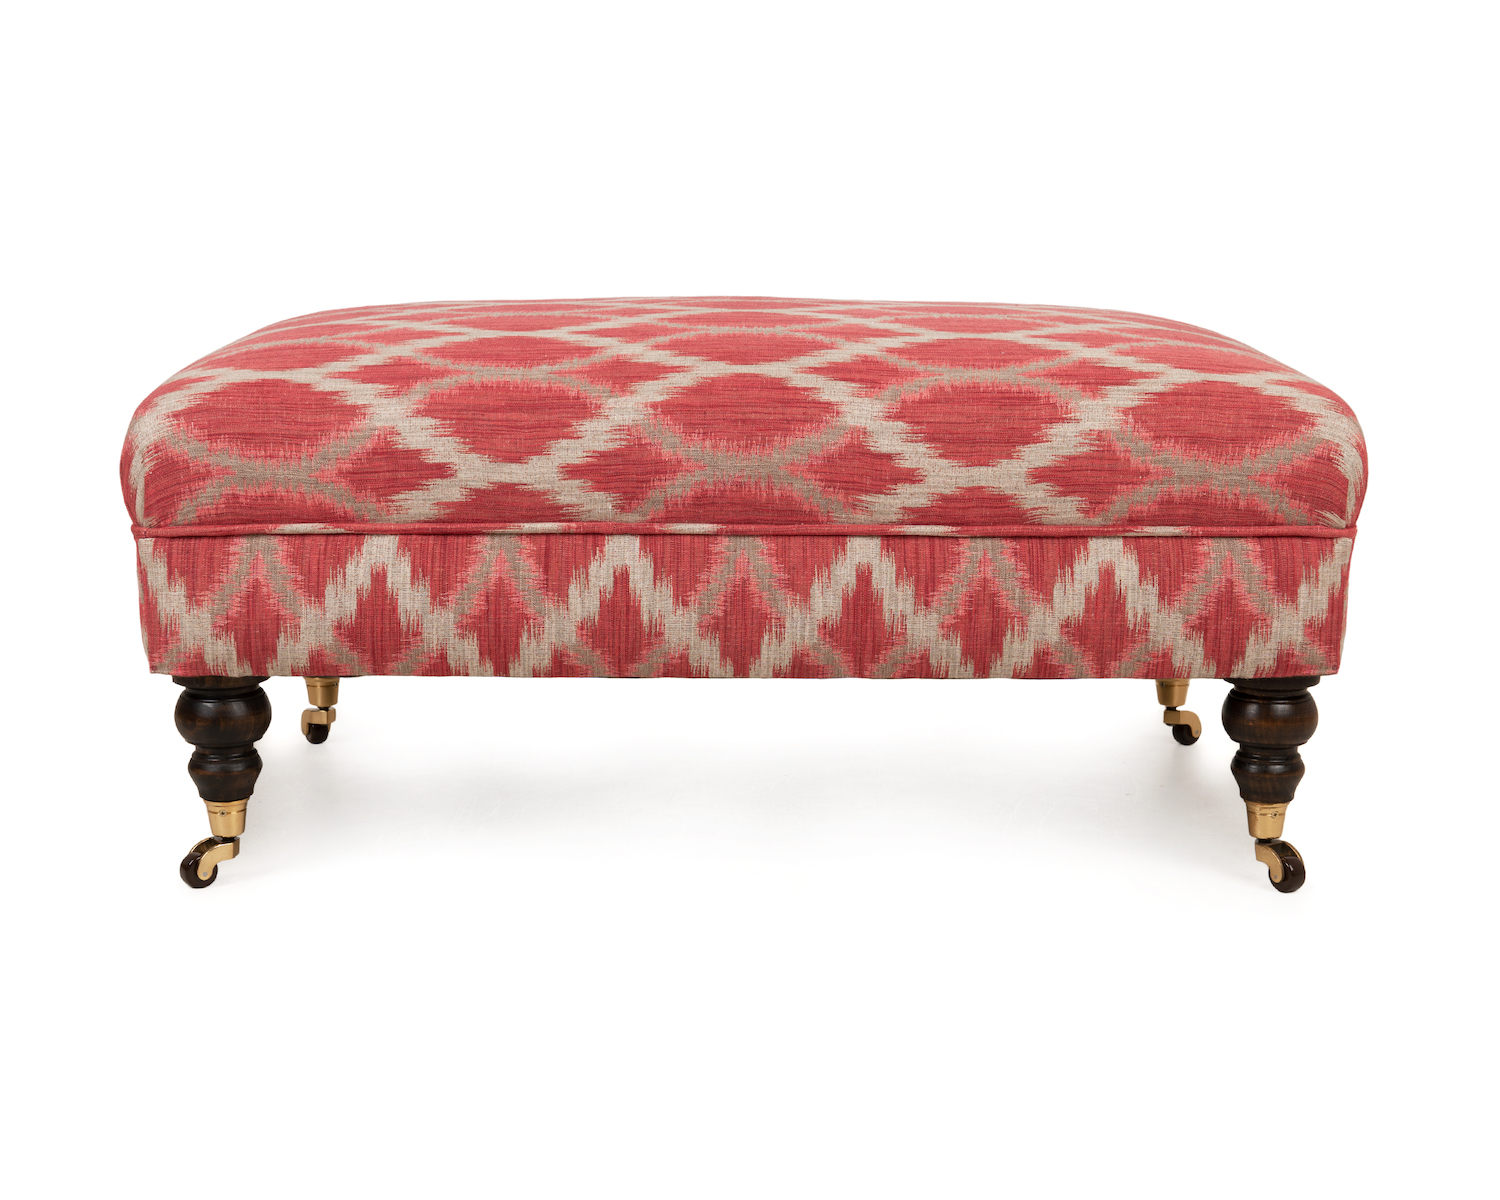 Ikat Footstool with Deep Piped Border Detail, Turned Legs and Brown China Castors